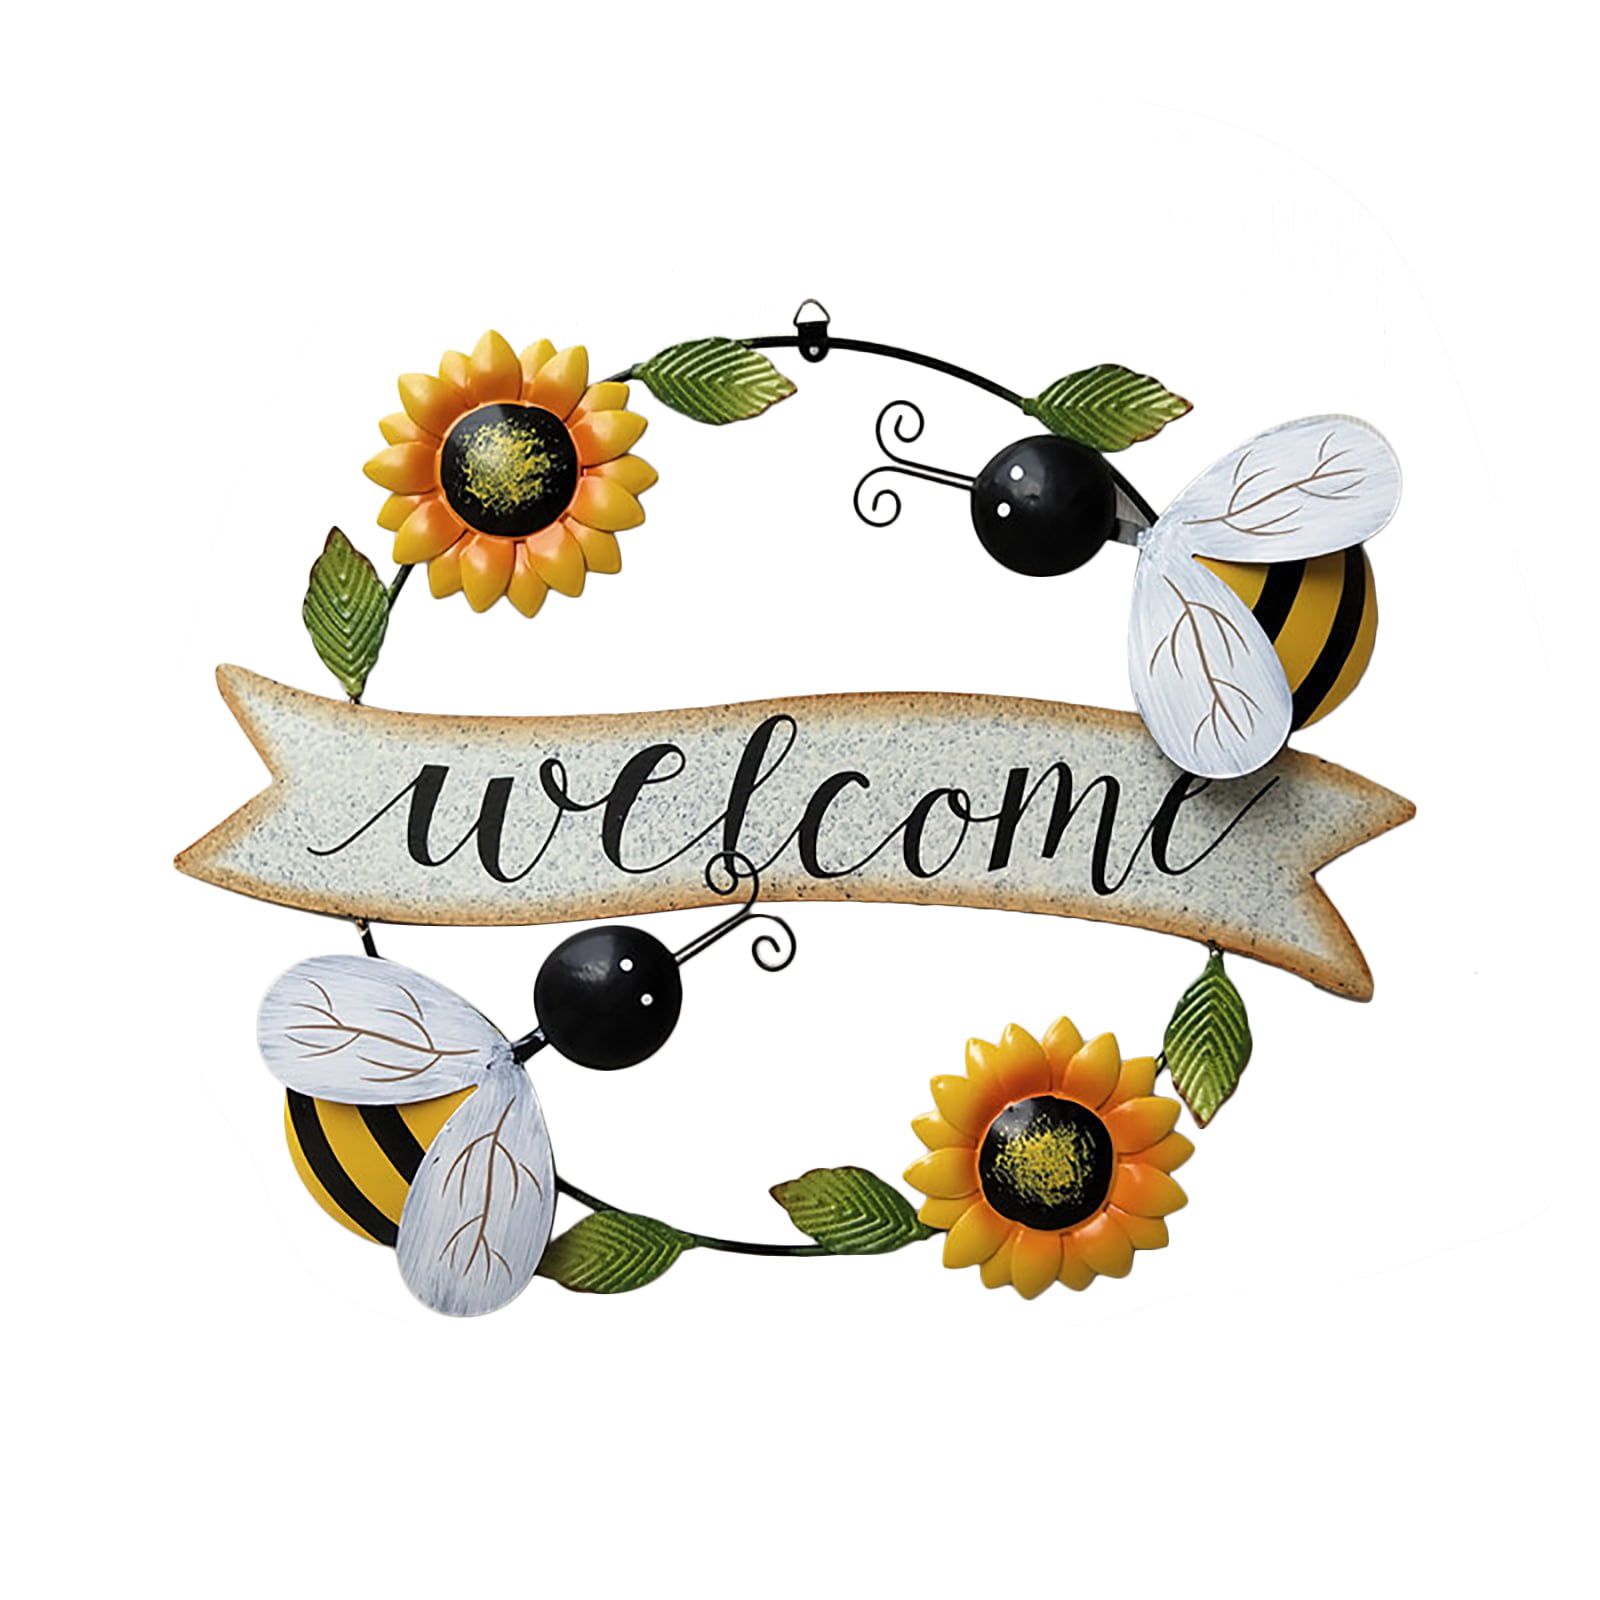 Sunflower Welcome Sign Decorative Vintage Metal Wall Hanging Home Garden  Decor – Welcome Plaque For Front Door, Garden Themed Sunflower & Butterfly  – Walmart Within Best And Newest Vintage Metal Welcome Sign Wall Art (View 4 of 20)